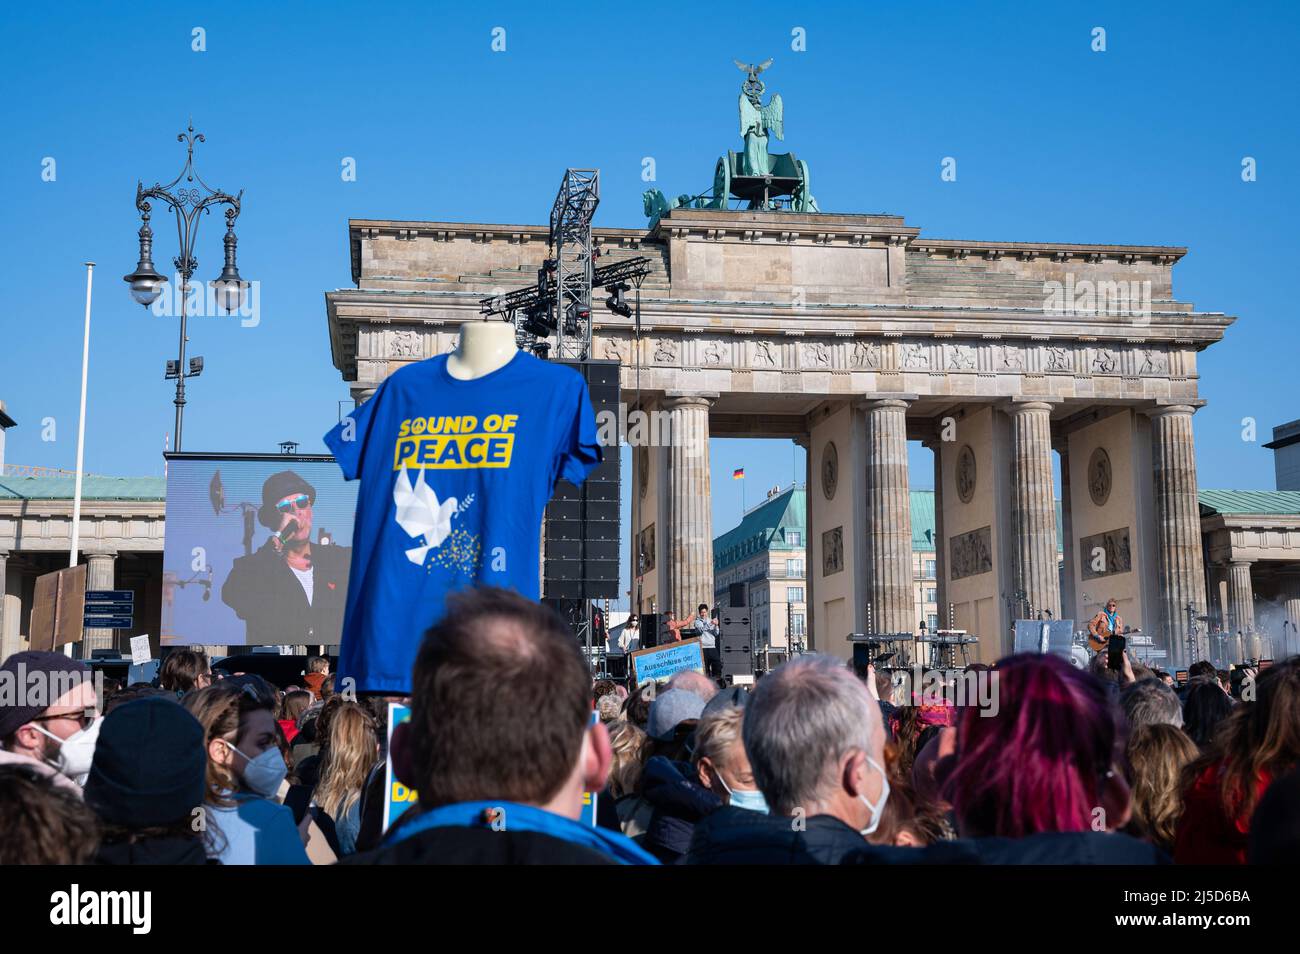 '20.03.2022, Berlin, Germany, Europe - Peace rally and benefit concert for Ukraine under the motto ''Sound of Peace'' at the Brandenburg Gate in the Mitte district. German artists and bands such as Peter Maffay, The BossHoss, Silbermond and many more will perform on the stage at the Platz des 18. Maerz. At the same time, the organizers are collecting money for the people in Ukraine and other war zones. [automated translation]' Stock Photo